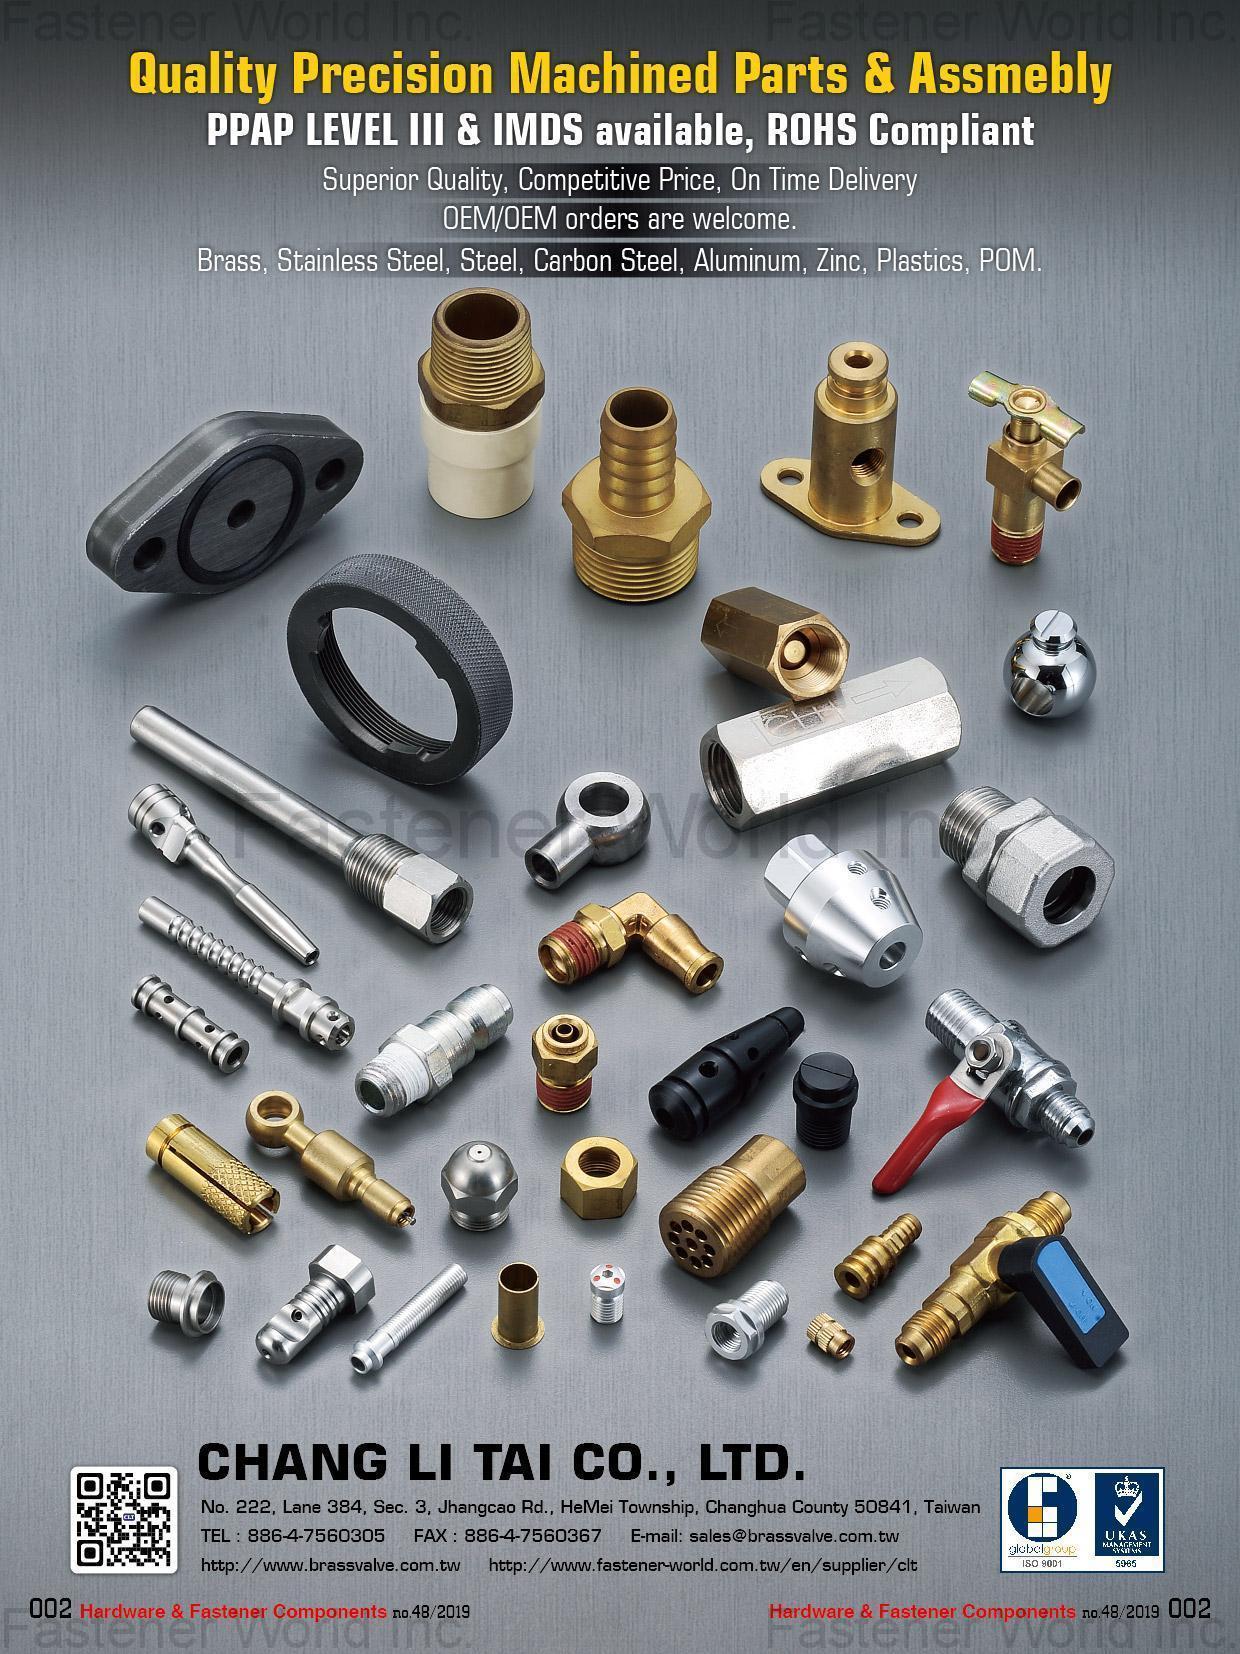 CHANG LI TAI CO., LTD. , Precision Machined Parts & Assembly,  Brass, Stainless Steel, Steel, Carbon Steel, Aluminum, Zinc, Plastics, PoM.OEM/ODM orders are welcome.